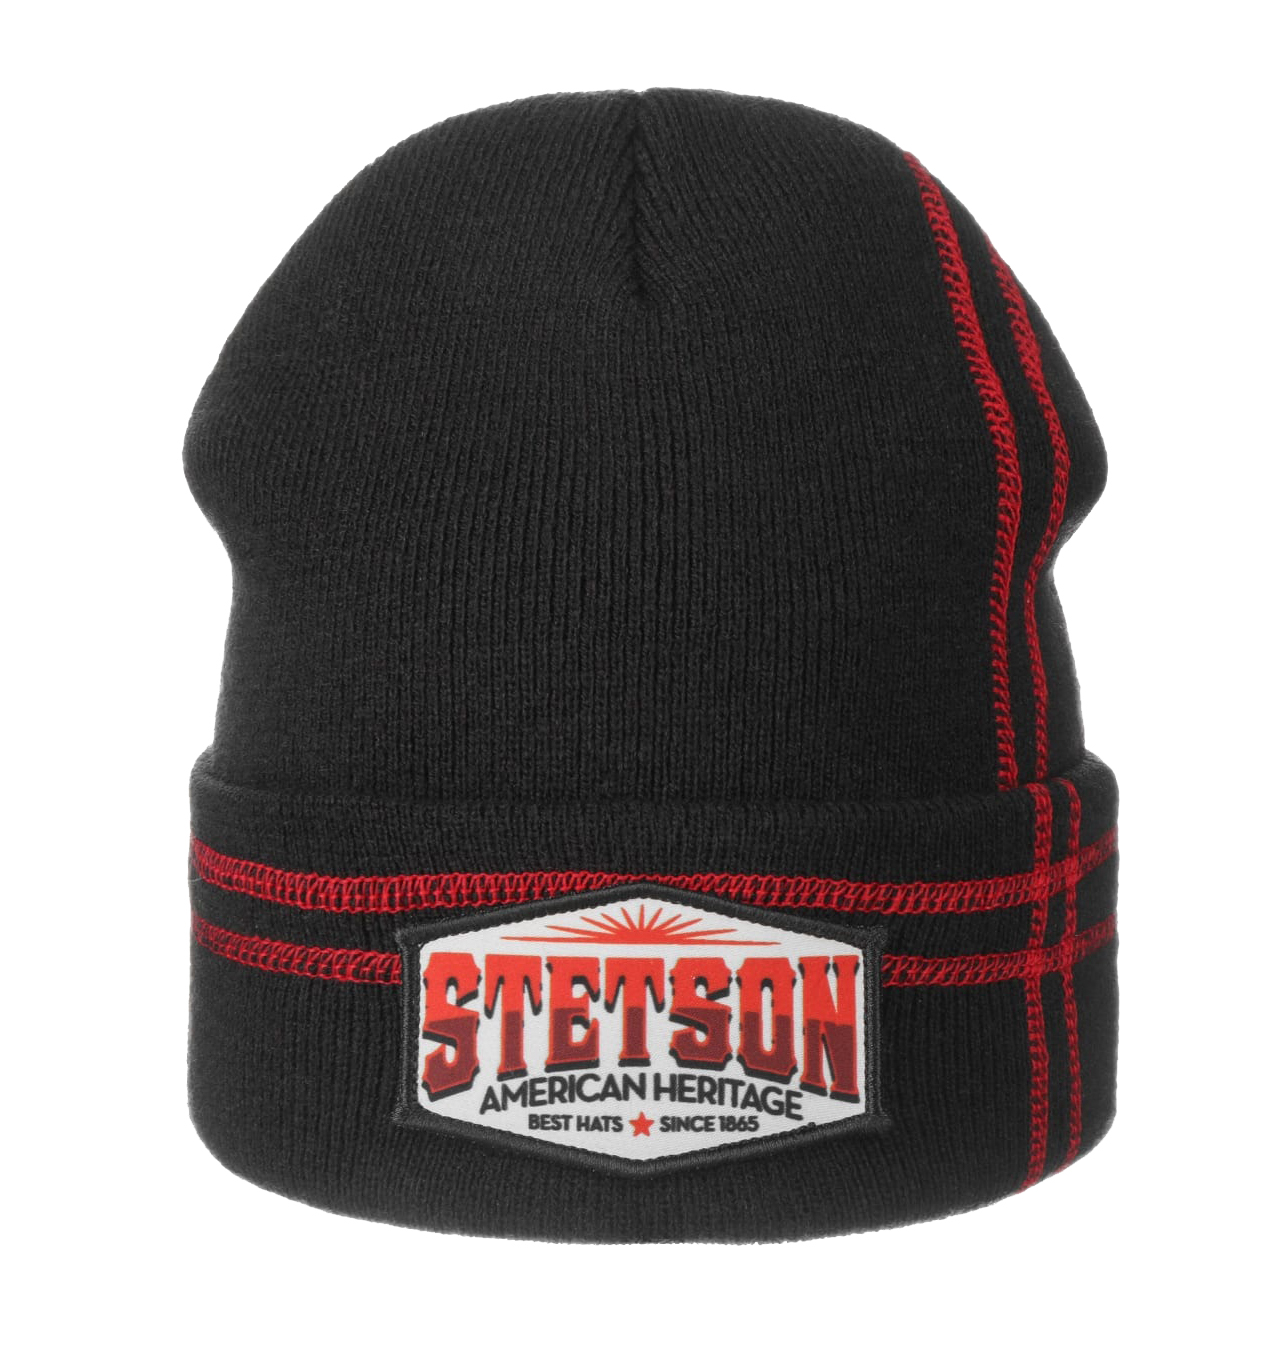 Stetson - American Heritage Patch Beanie - Black